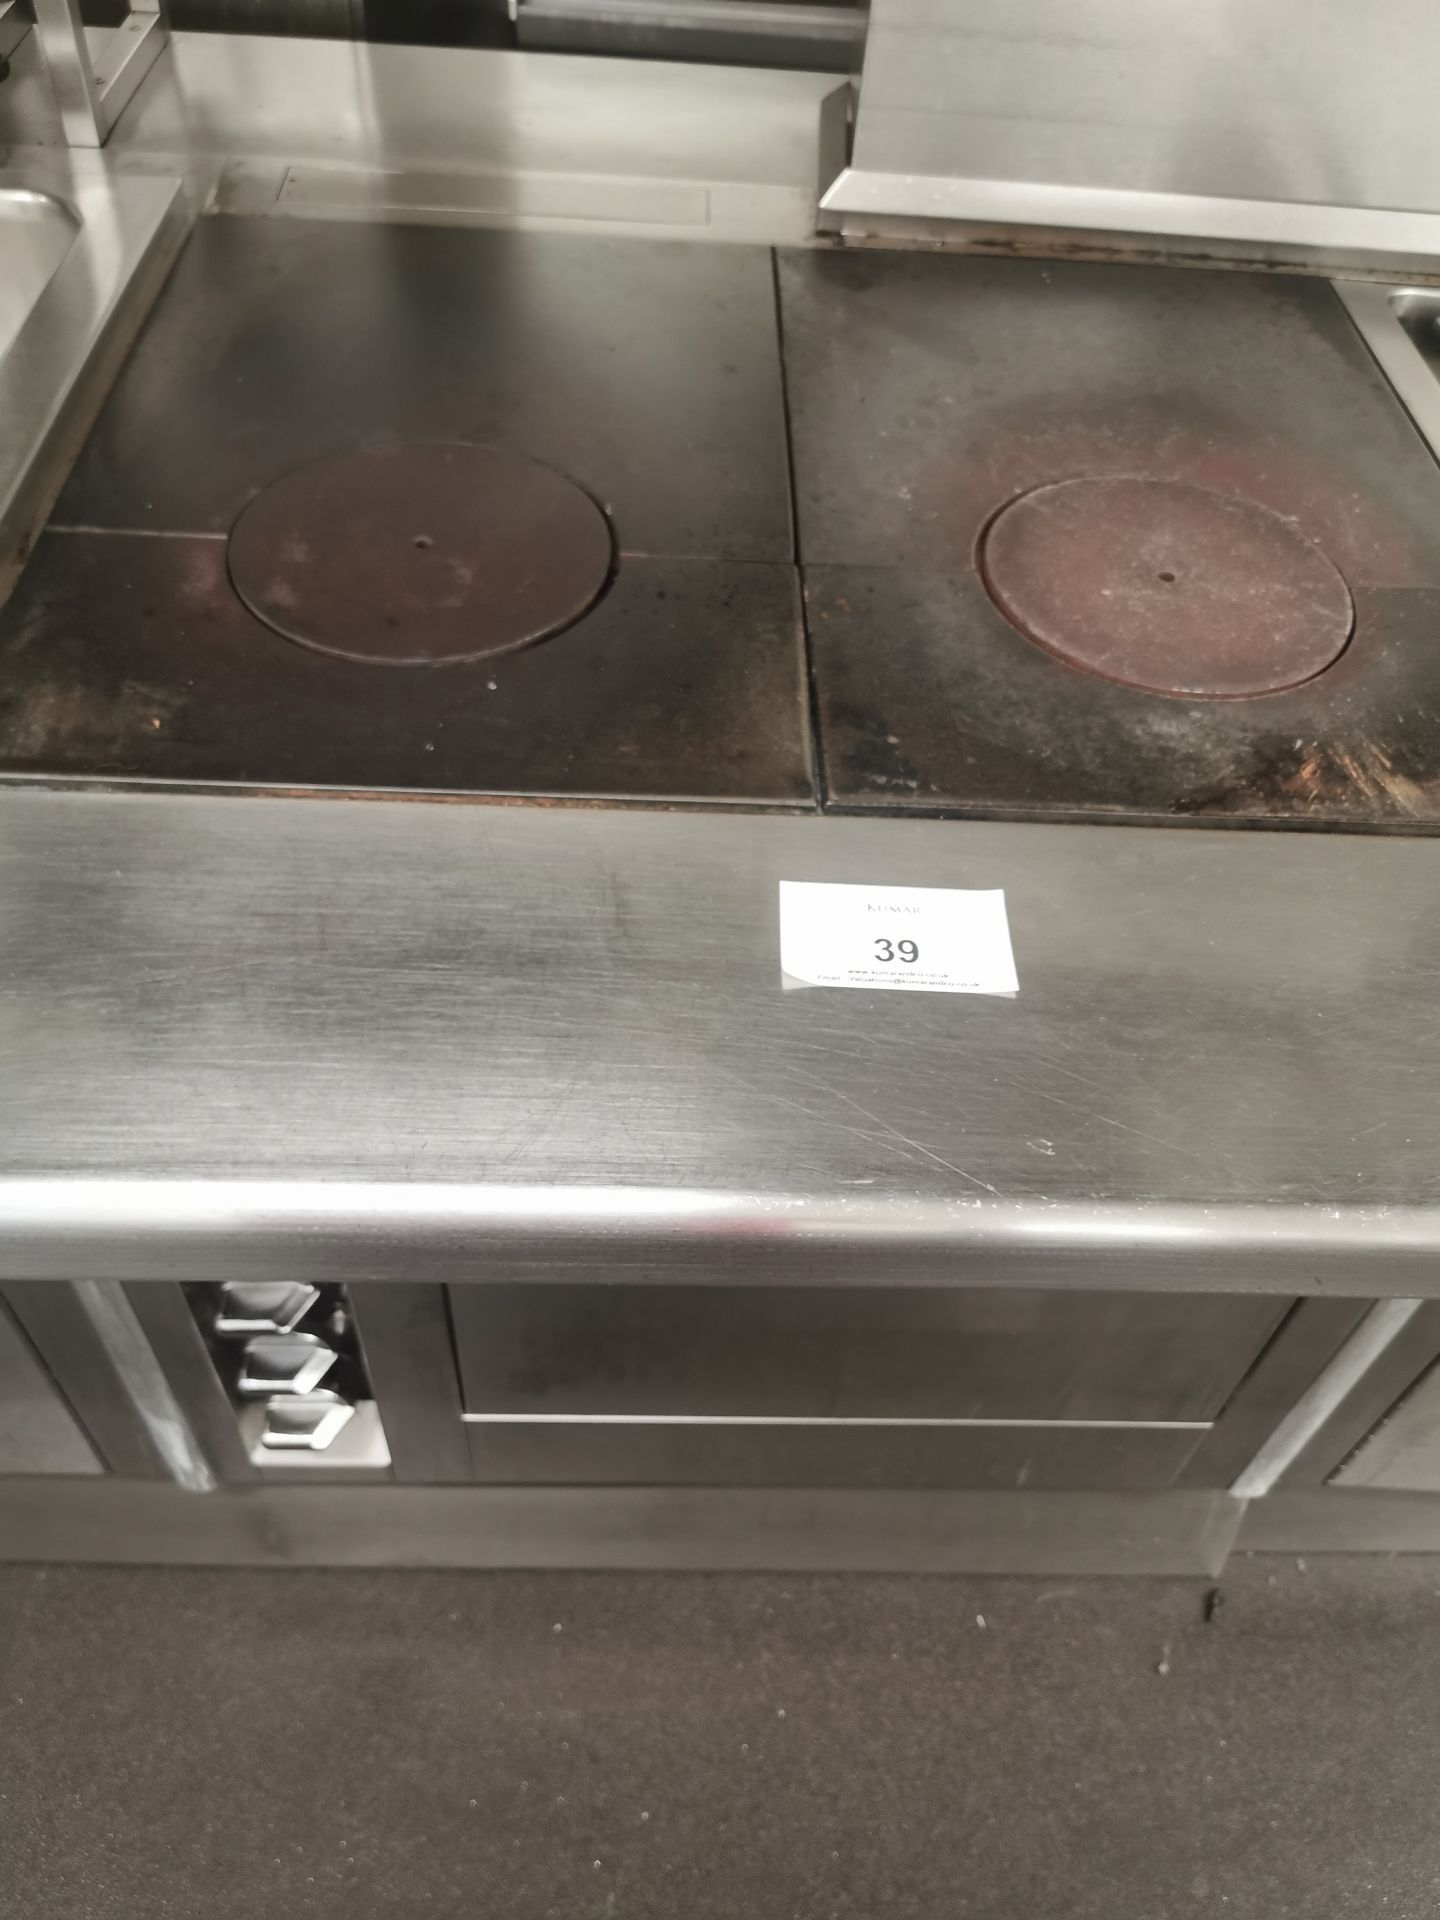 Charvet pro series twin hot plates and oven W85cm - Image 4 of 4